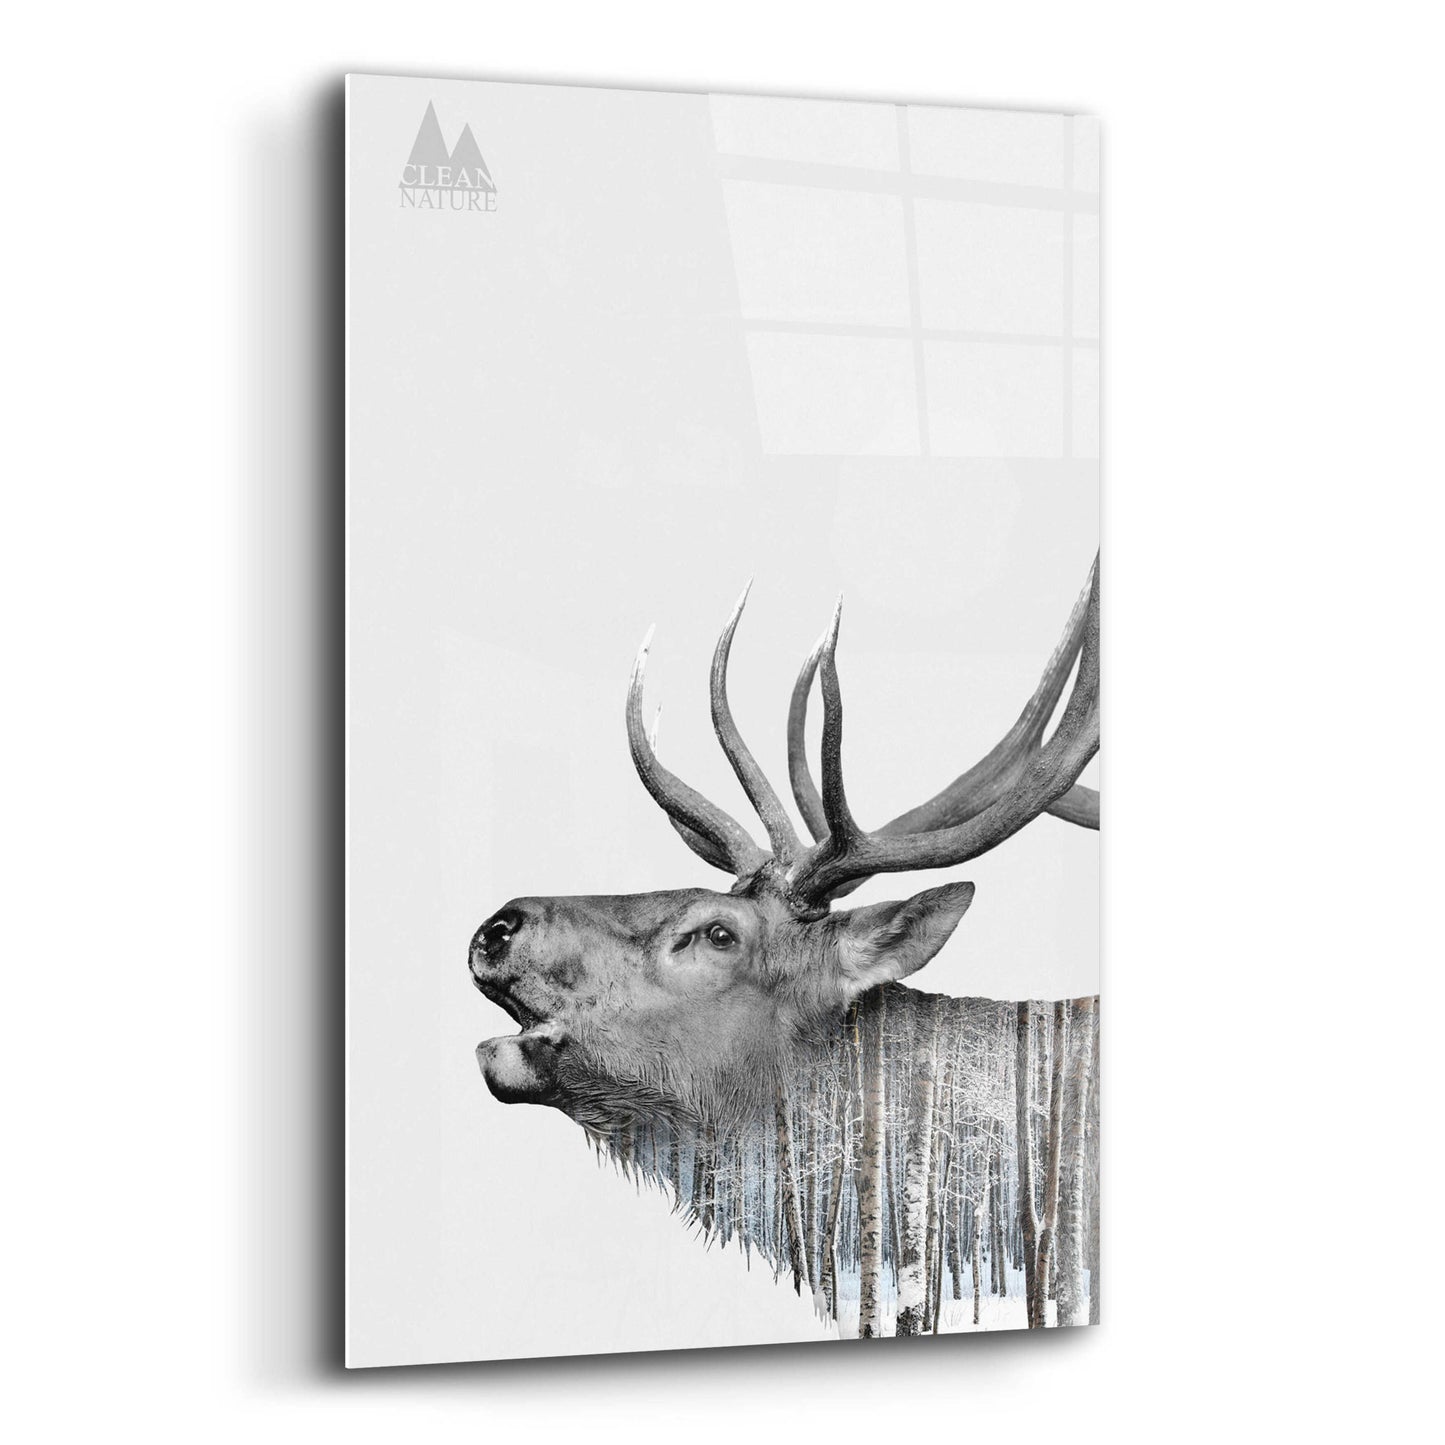 Epic Art 'Deer' by Clean Nature, Acrylic Glass Wall Art,16x24